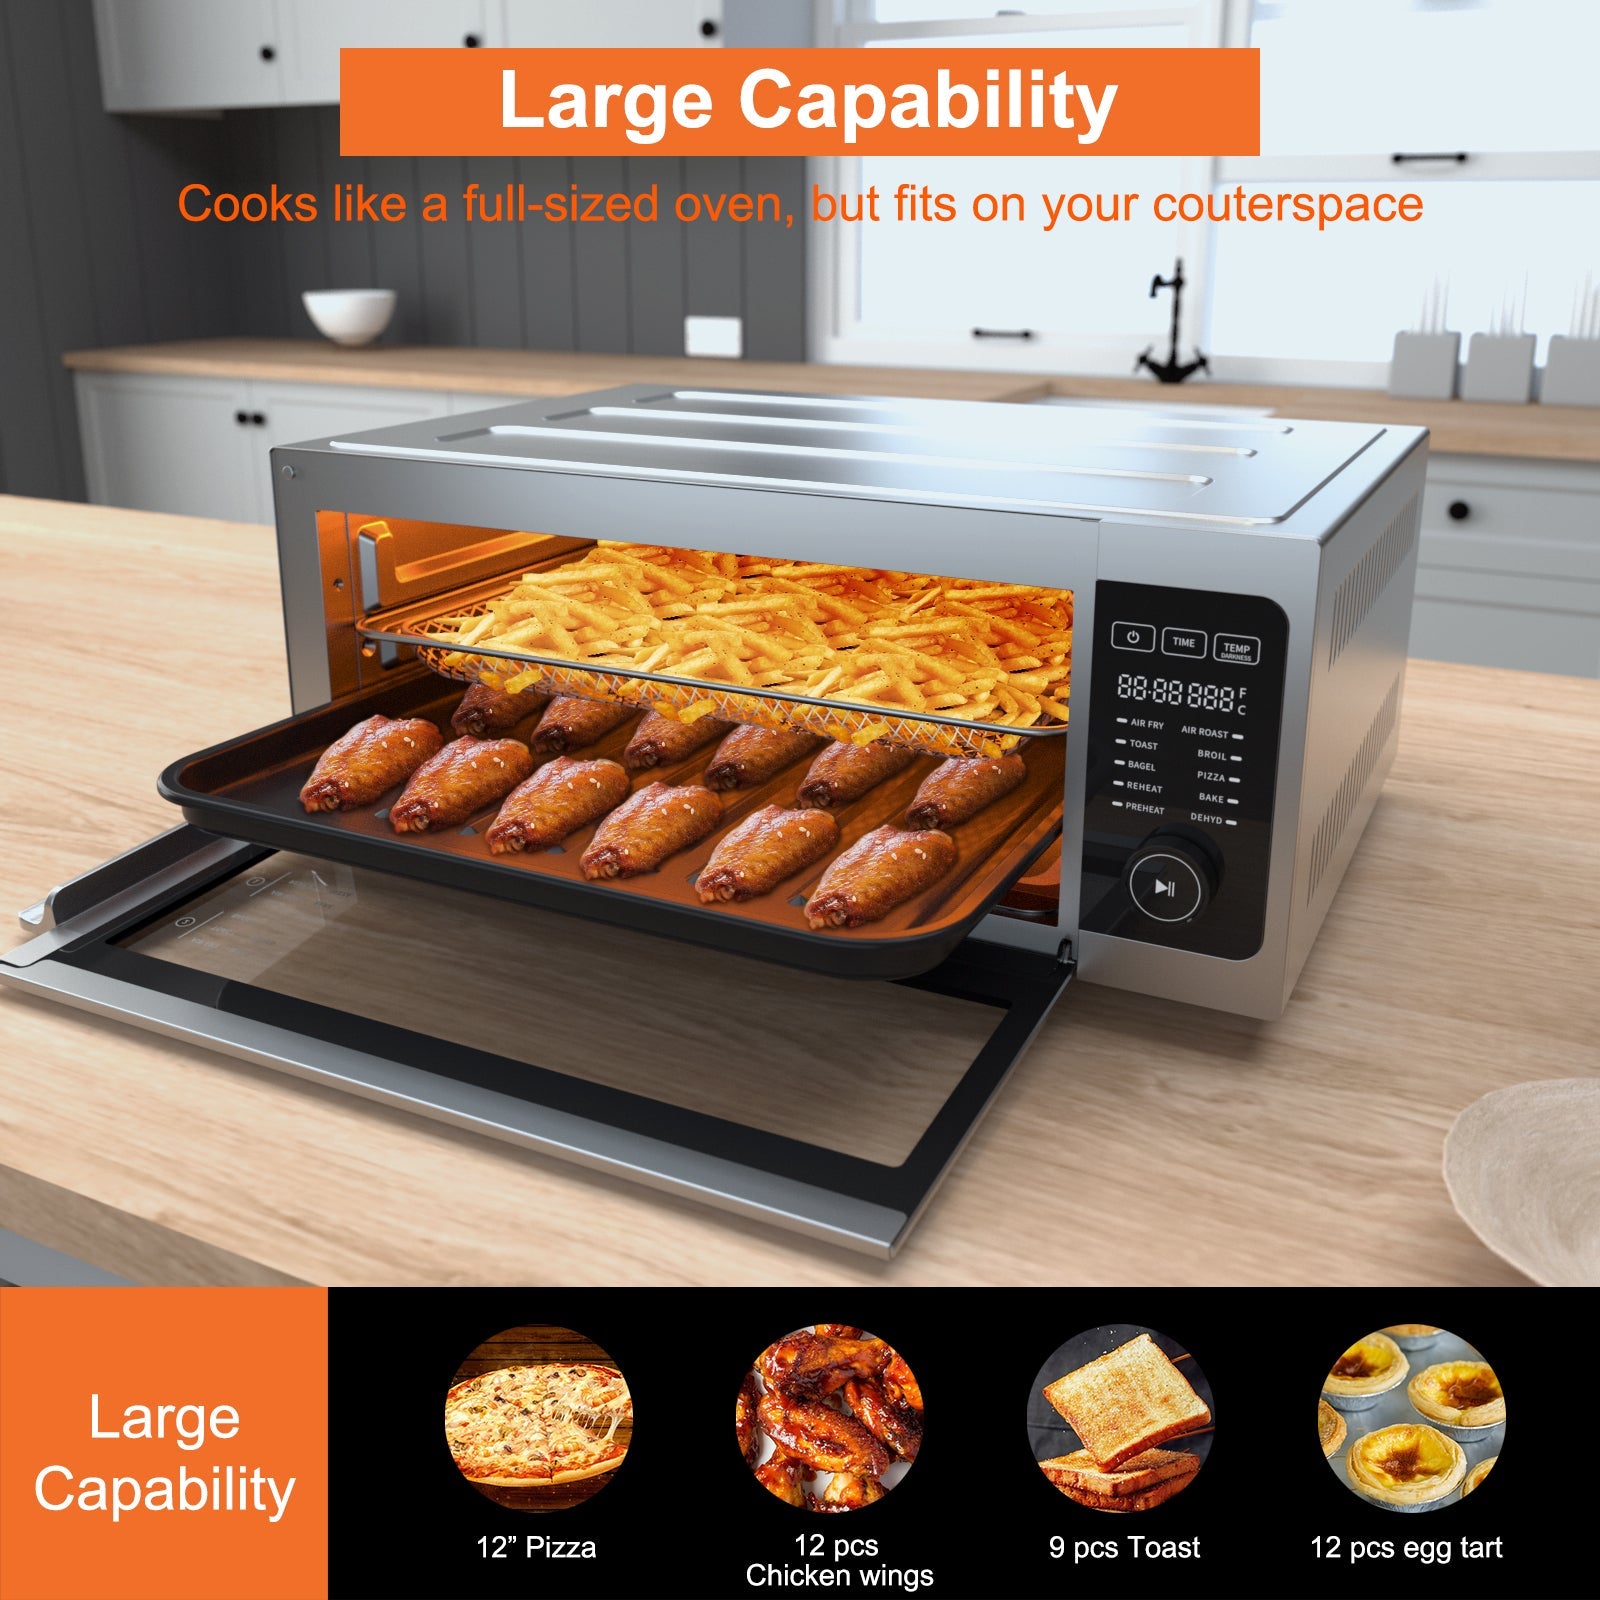 Air Fryer Toaster Oven Combo - Fabuletta 10-in-1 Countertop Convection Oven  1800W, Flip Up & Away Capability for Storage Space, Oil-Less Air Fryer